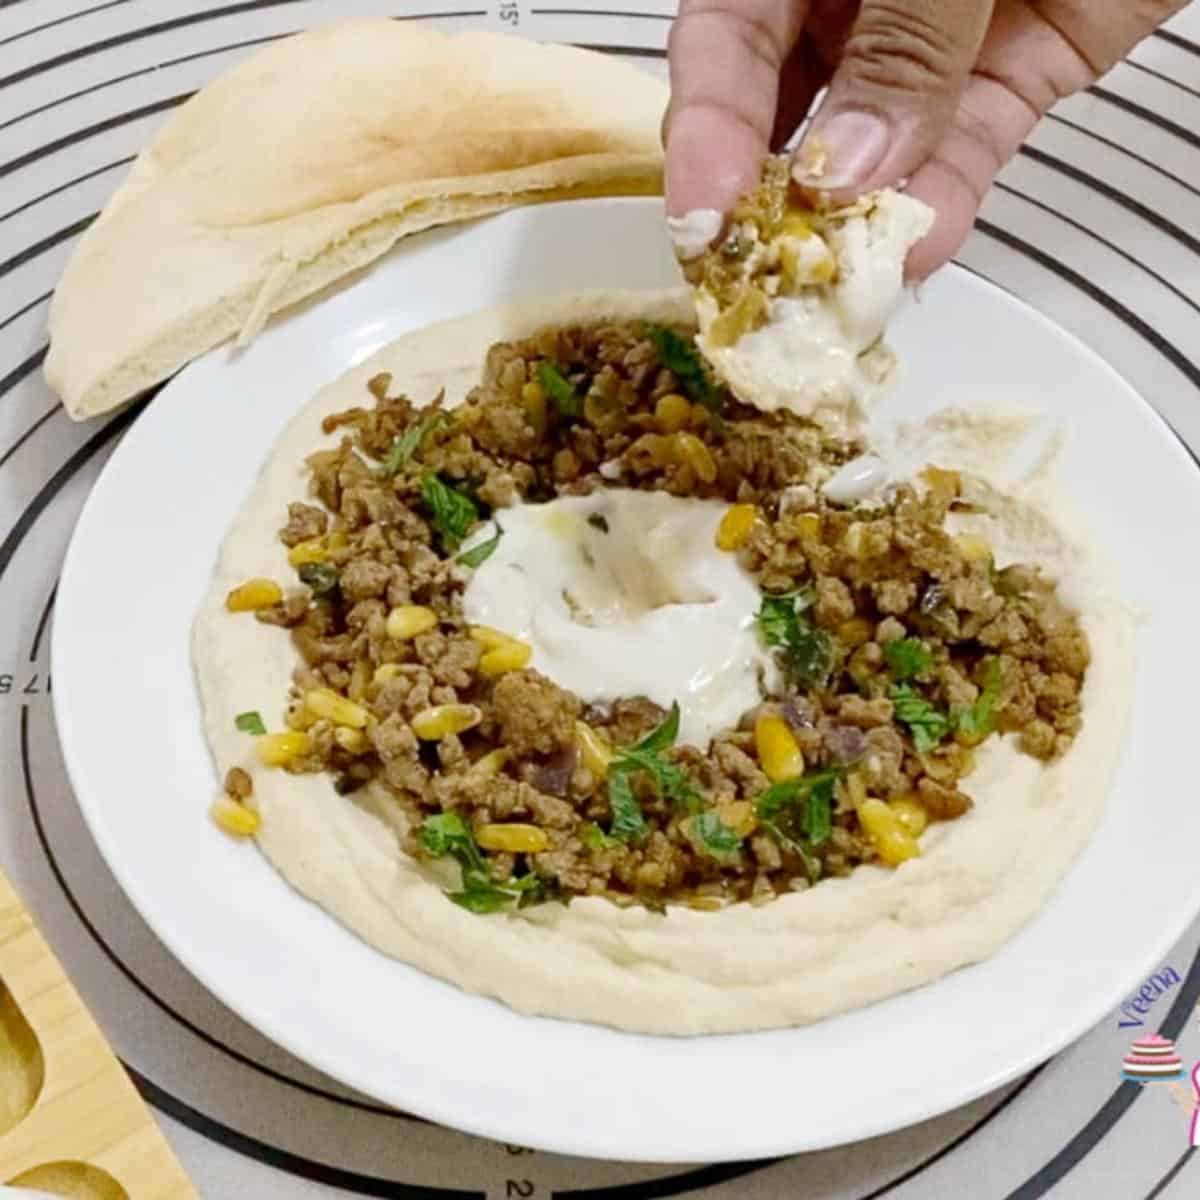 A plate with ground beef and hummus,